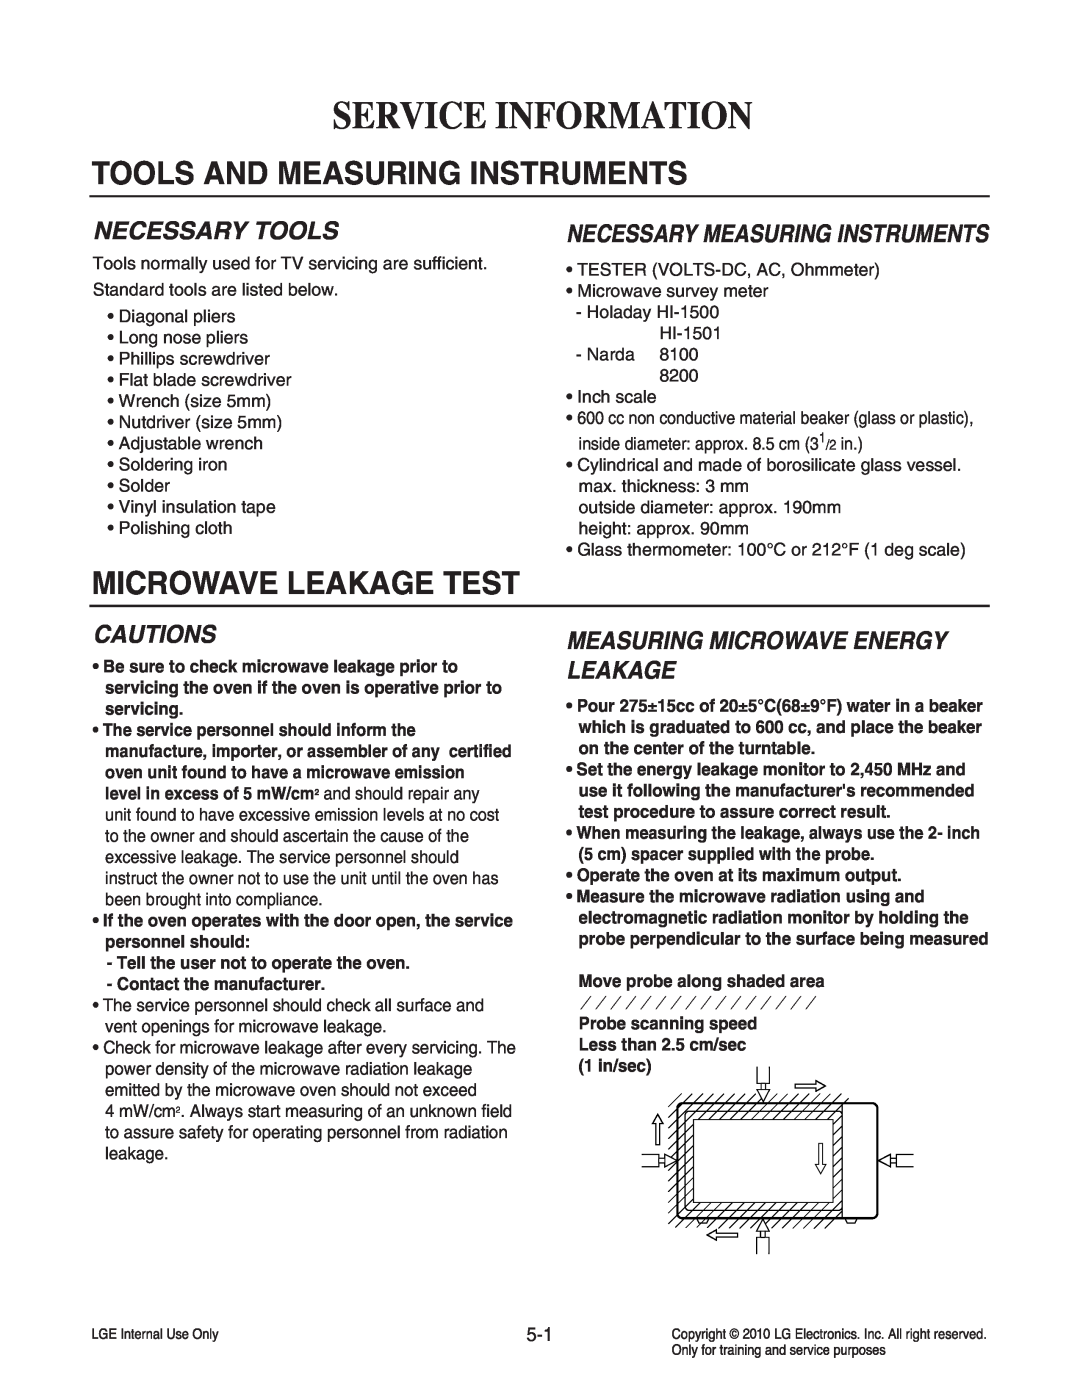 Frigidaire LCRT2010ST Service Information, Tools And Measuring Instruments, Microwave Leakage Test, Necessary Tools 